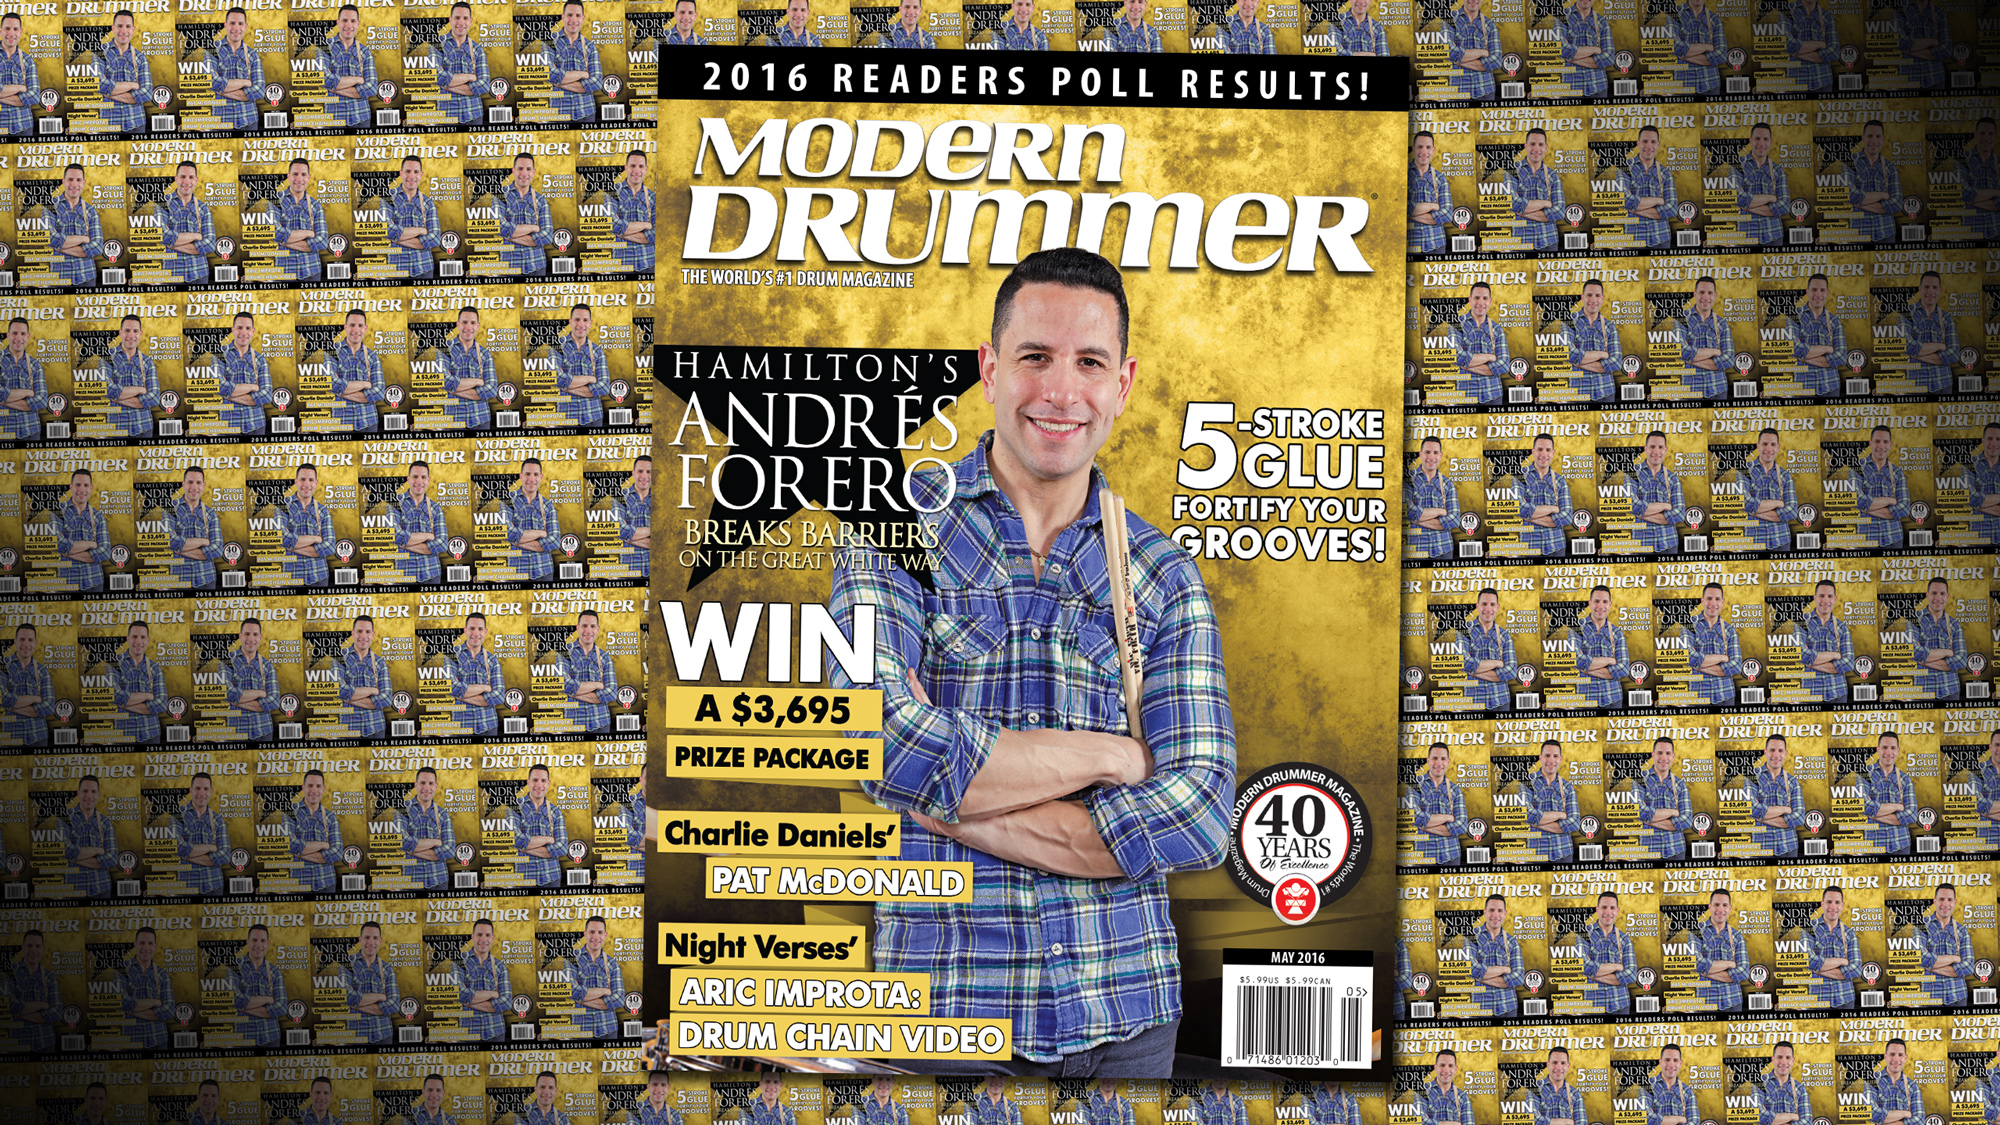 May 2016 Issue of Modern Drummerfeaturing Andrés Forero of Hamilton